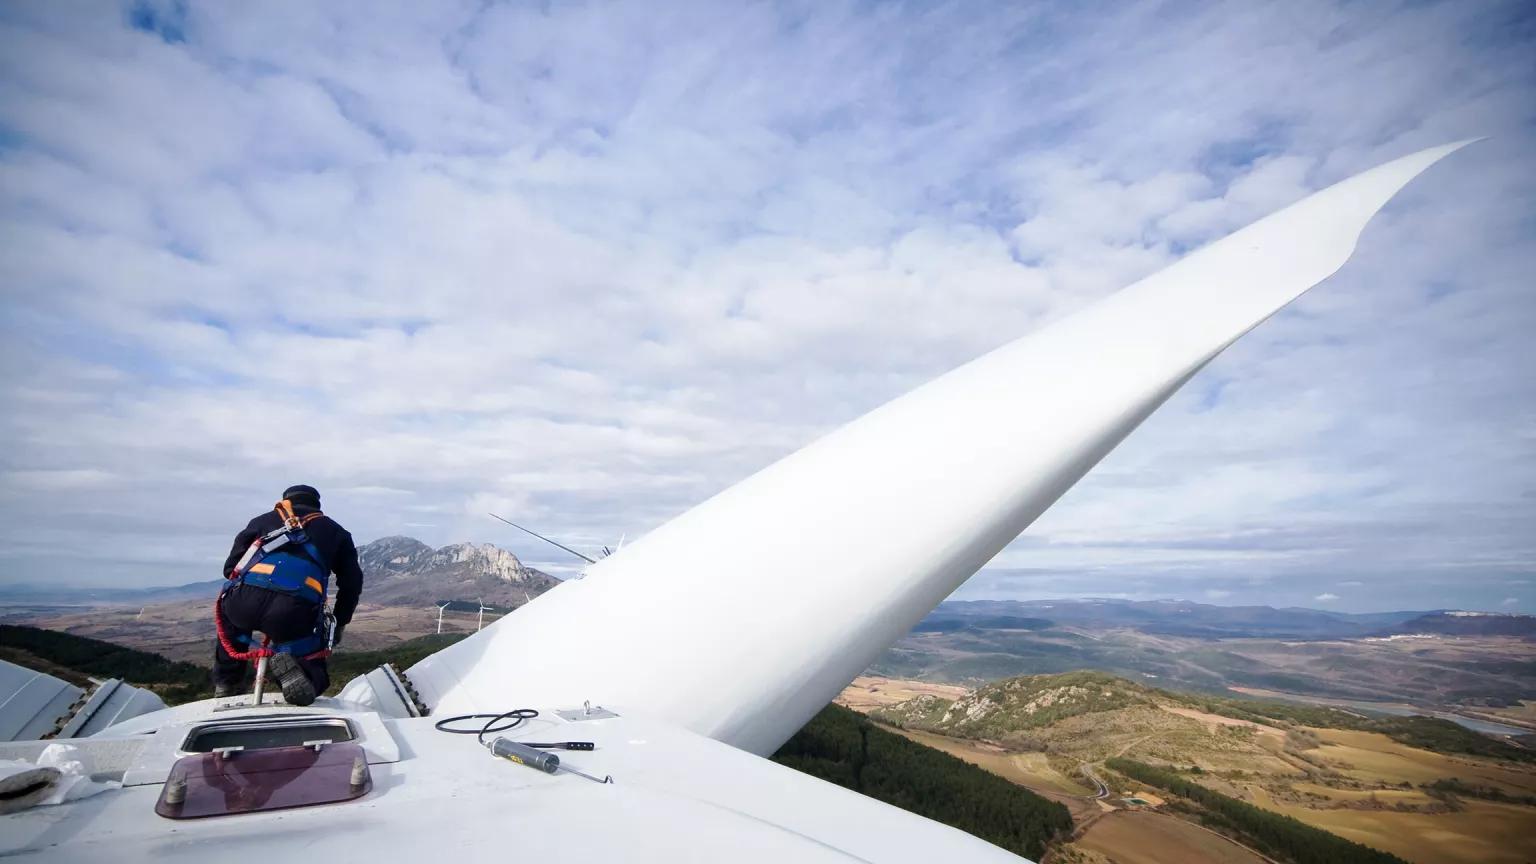 Rear view of a technician kneeling on the nacelle of a wind turbine and looking out at a sweeping, hilly landscape